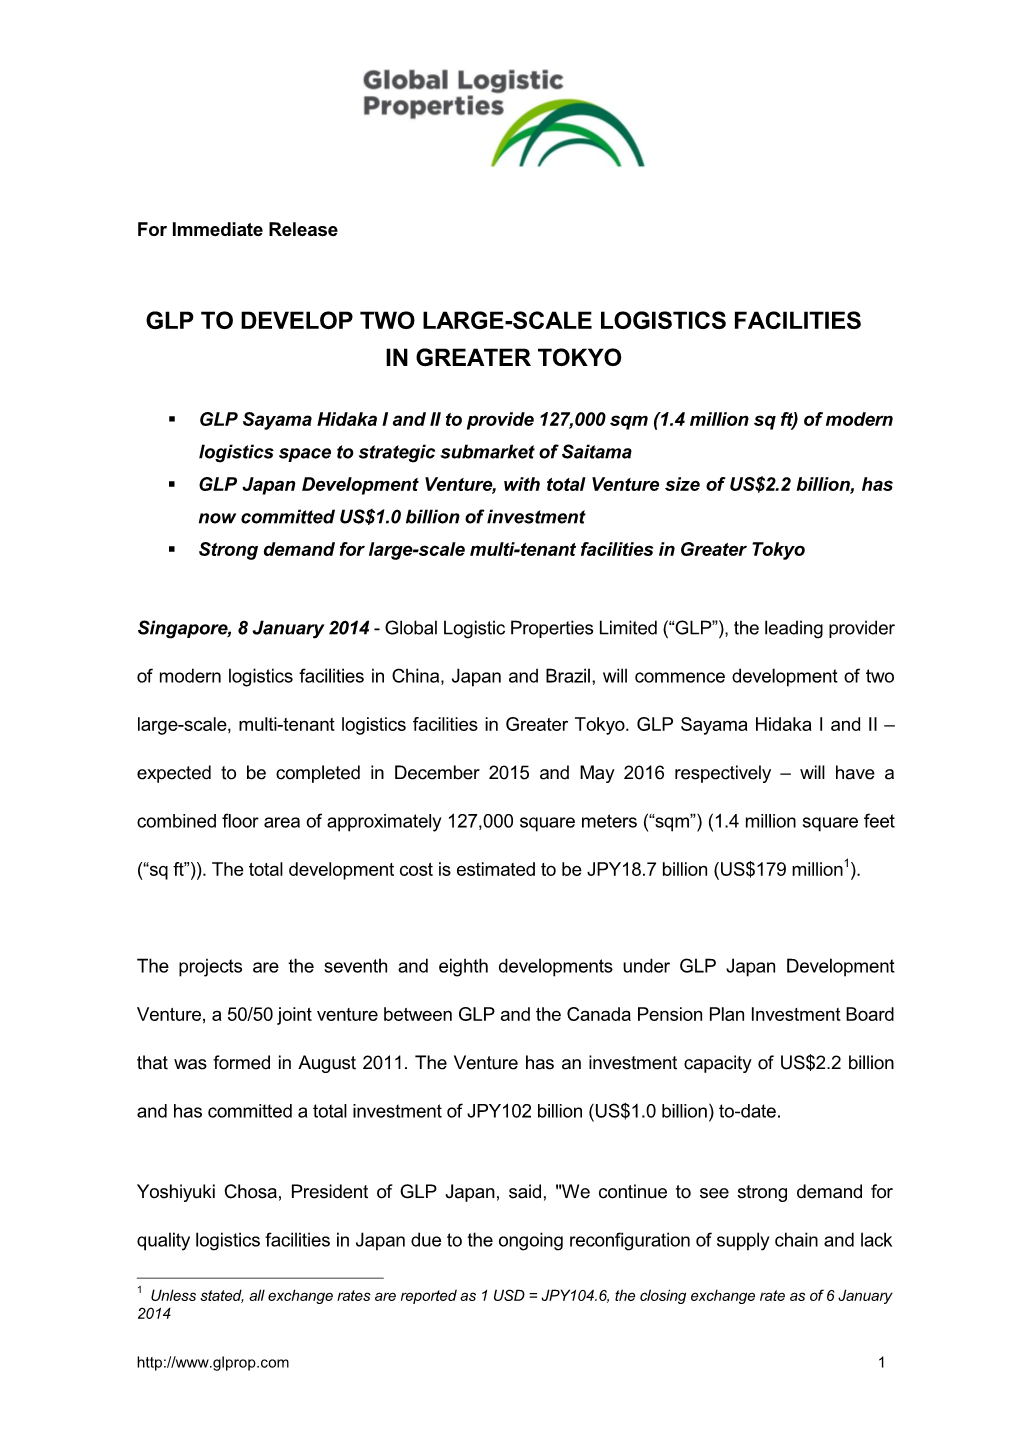 Glp to Develop Two Large-Scale Logistics Facilities in Greater Tokyo